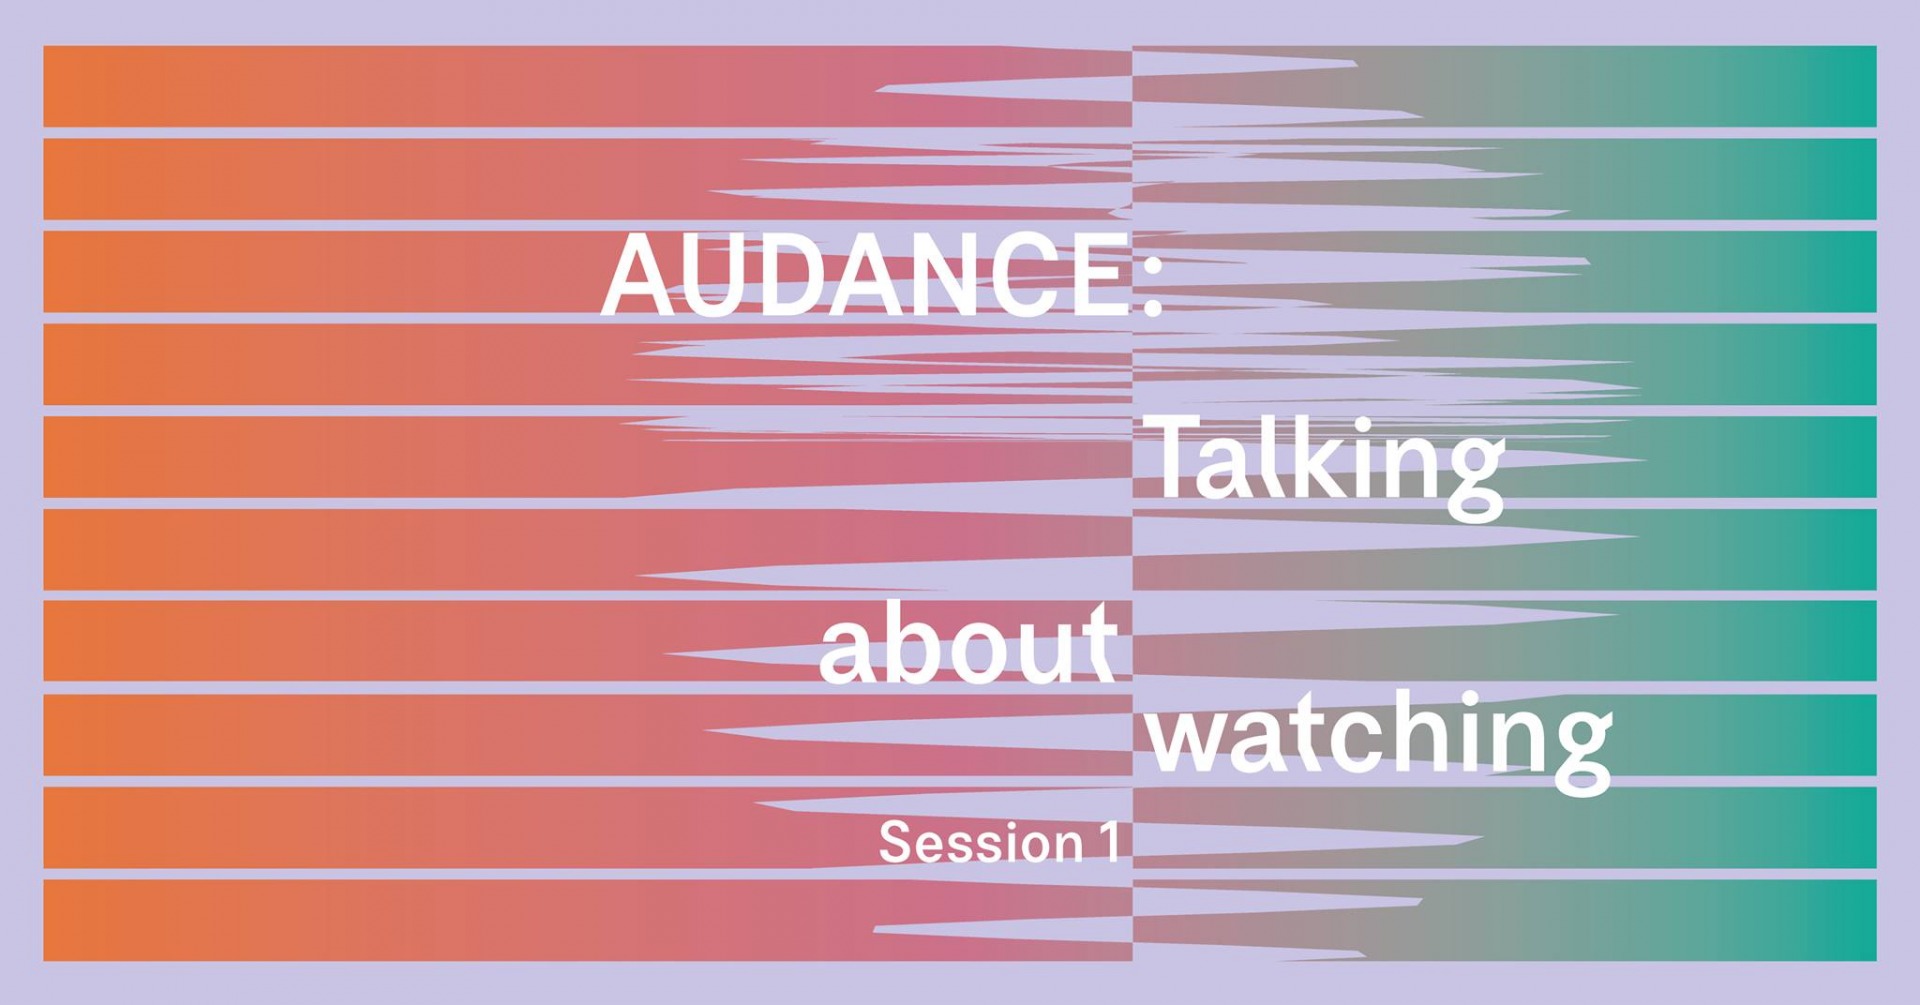 AUDANCE: TALKING ABOUT WATCHING